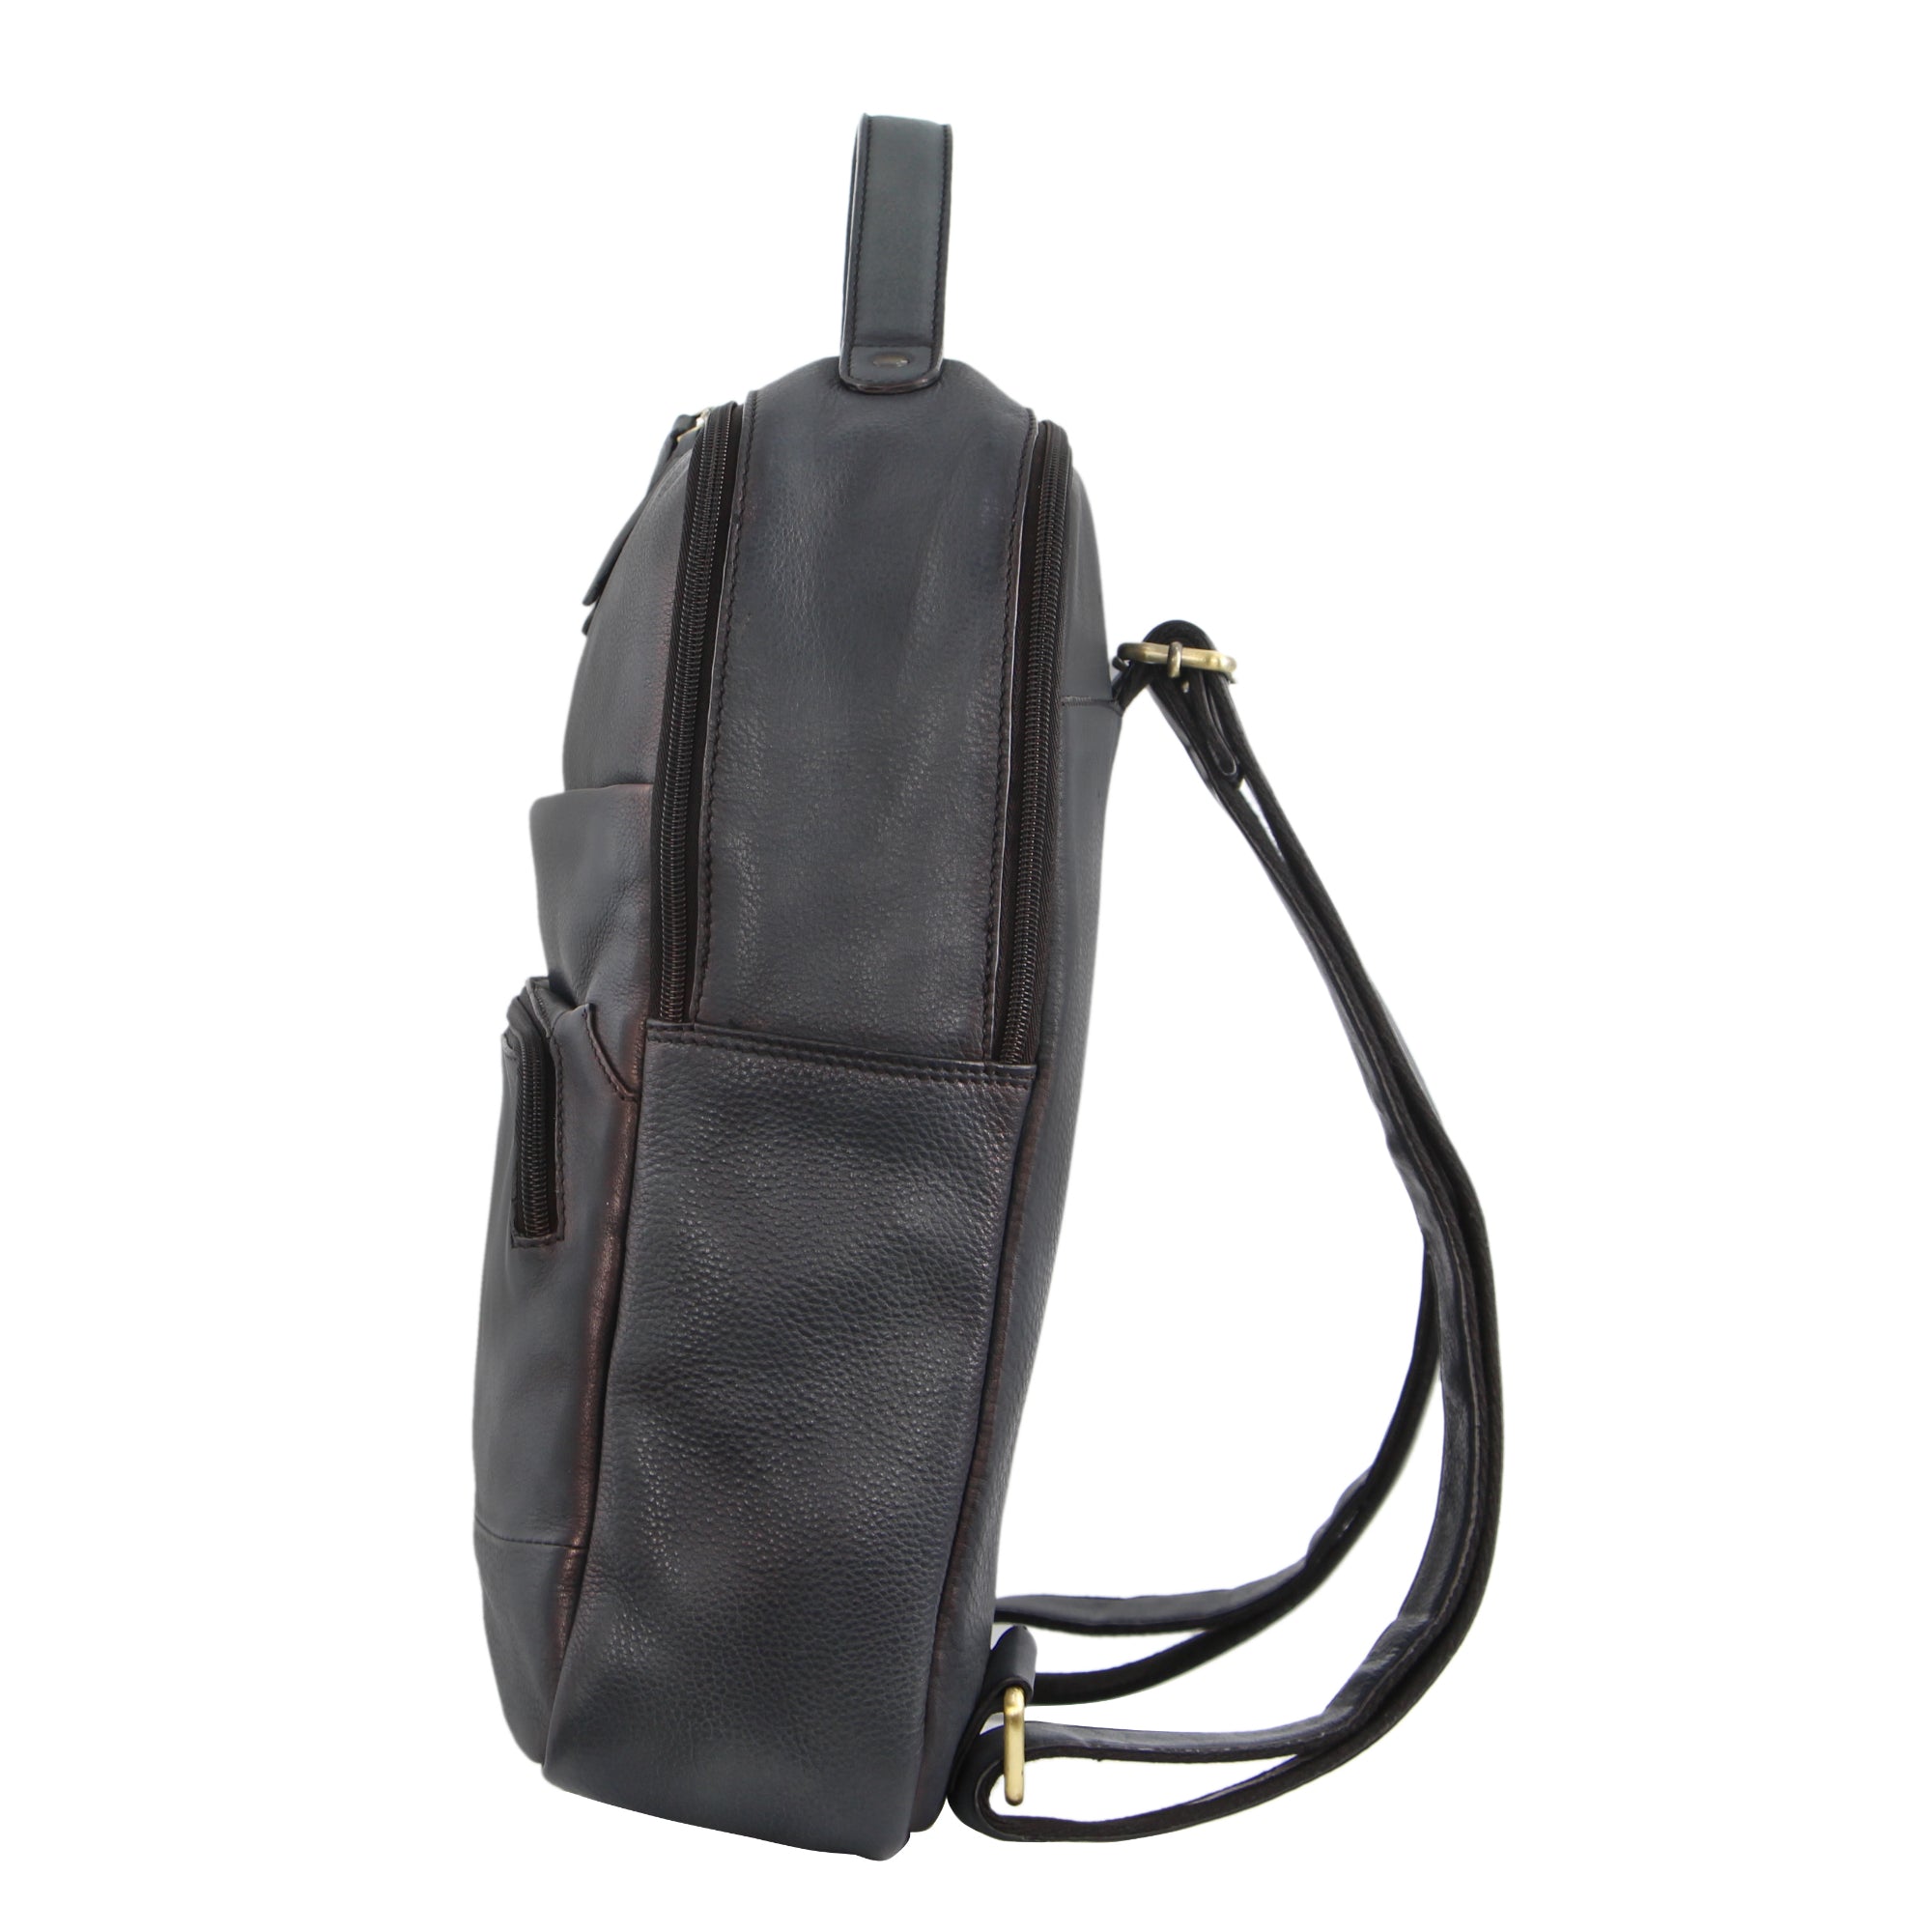 Pierre Cardin Rustic Leather Business Backpack/Computer Bag in Black